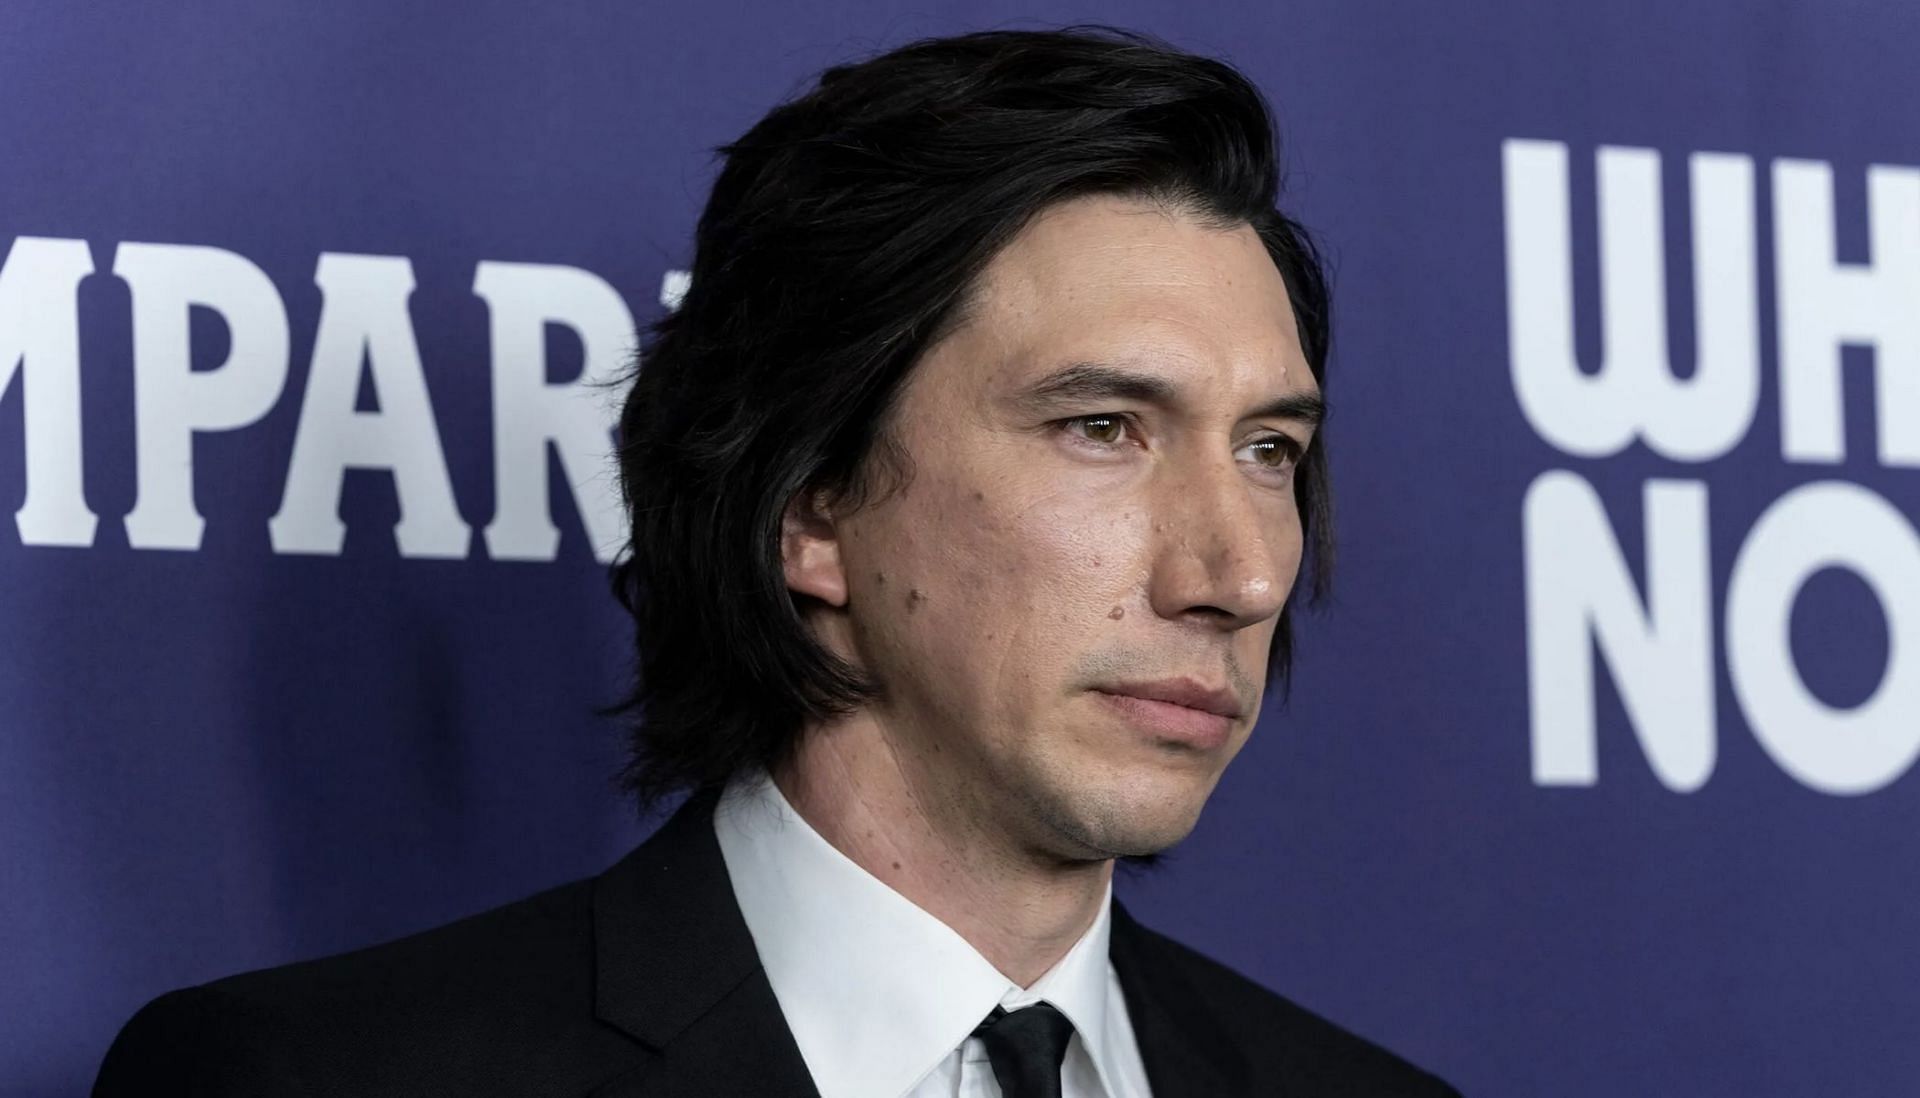 Adam Driver is rumored to be in the final negotiations for the role of Reed Richards in the Fantastic Four movie (Image via Getty)